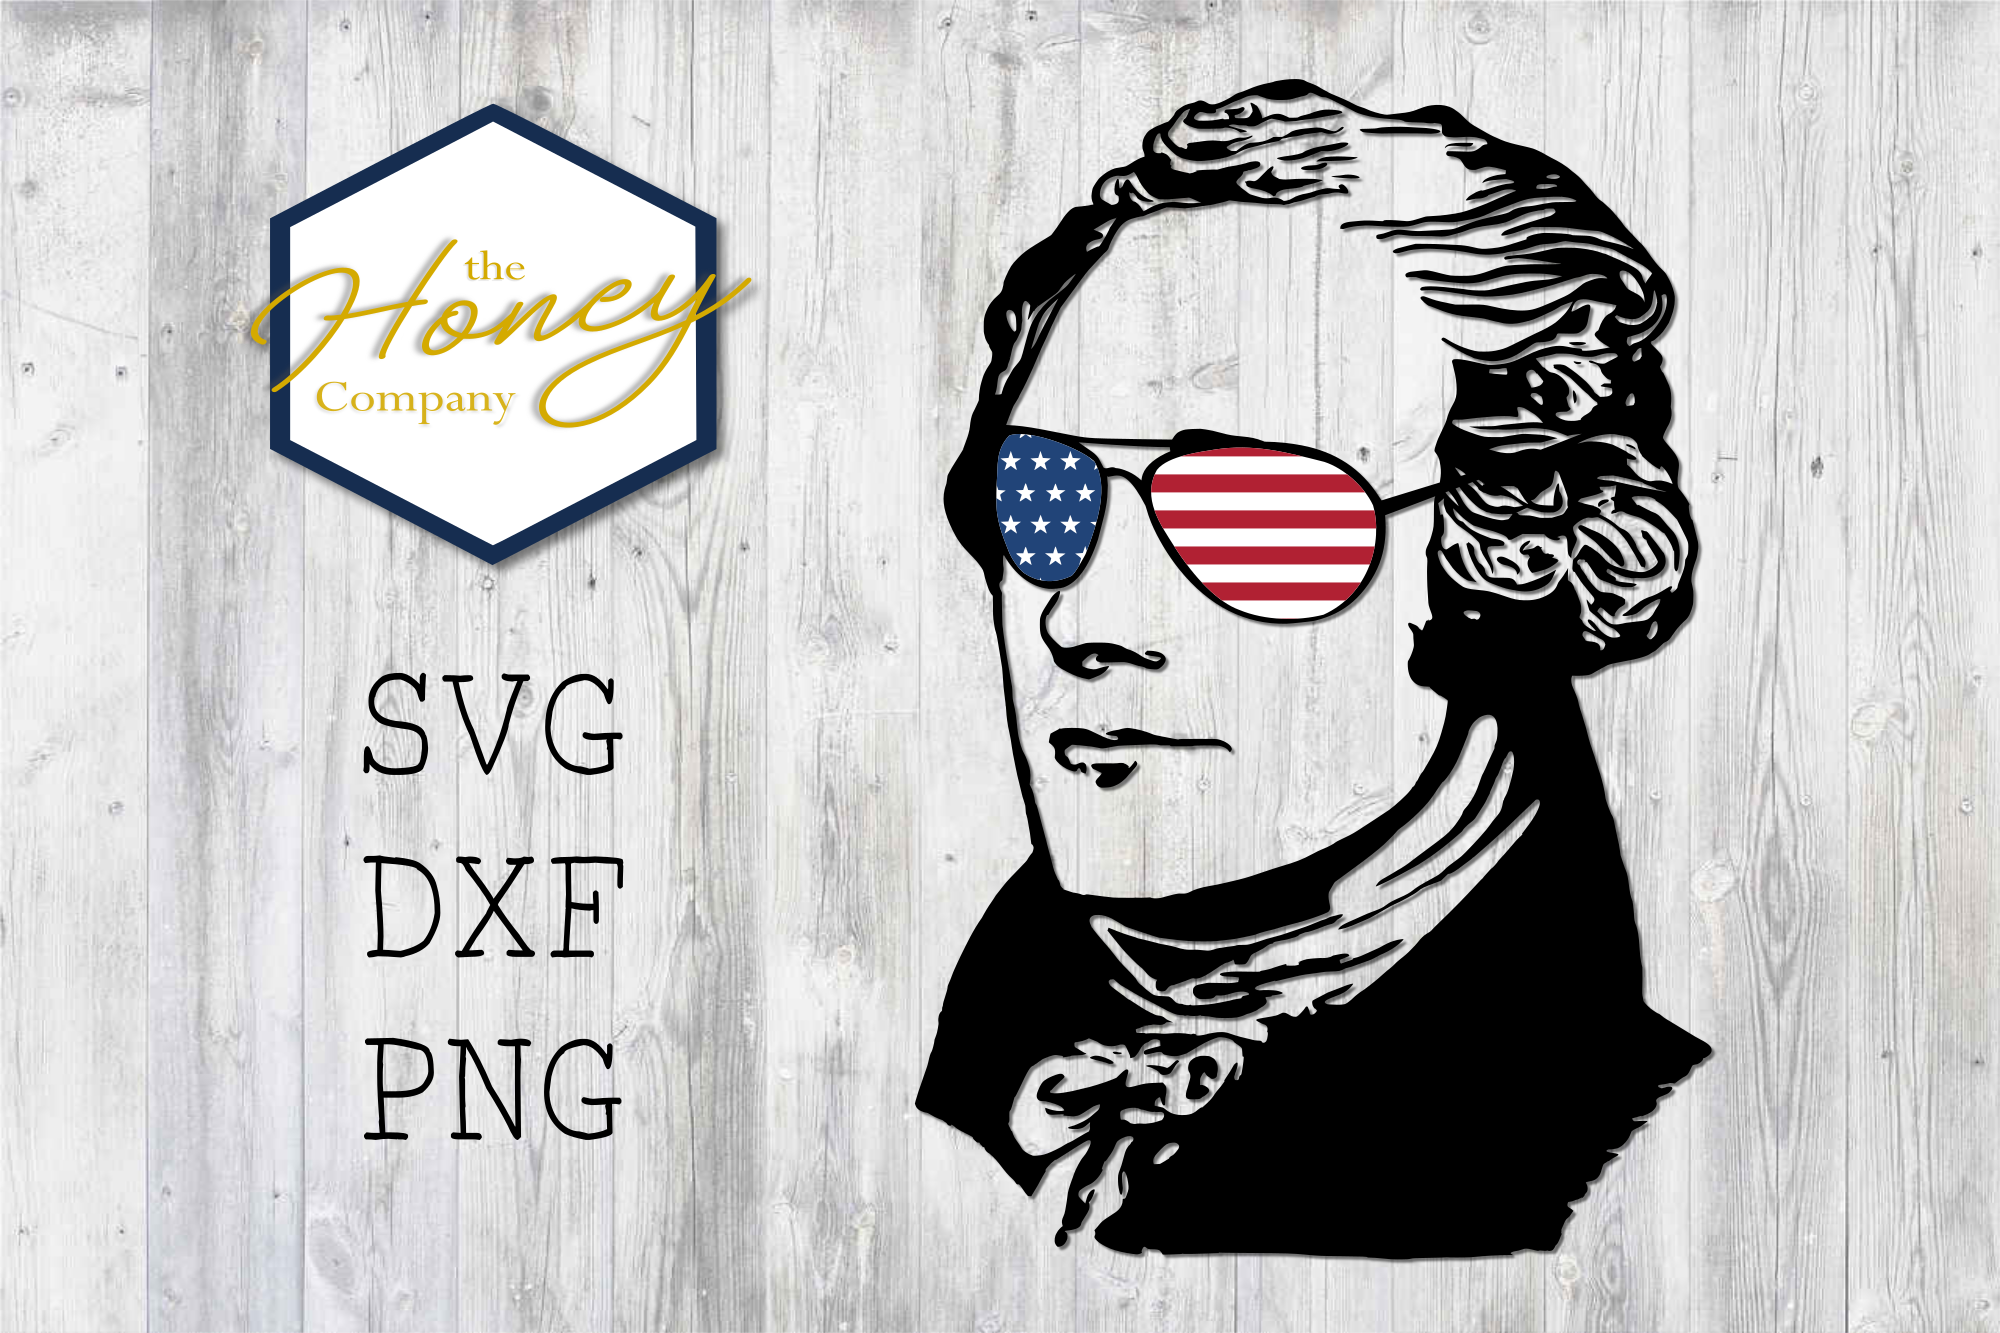 Cool Alexander Hamilton SVG PNG DXF 4th of July Design example image 1.